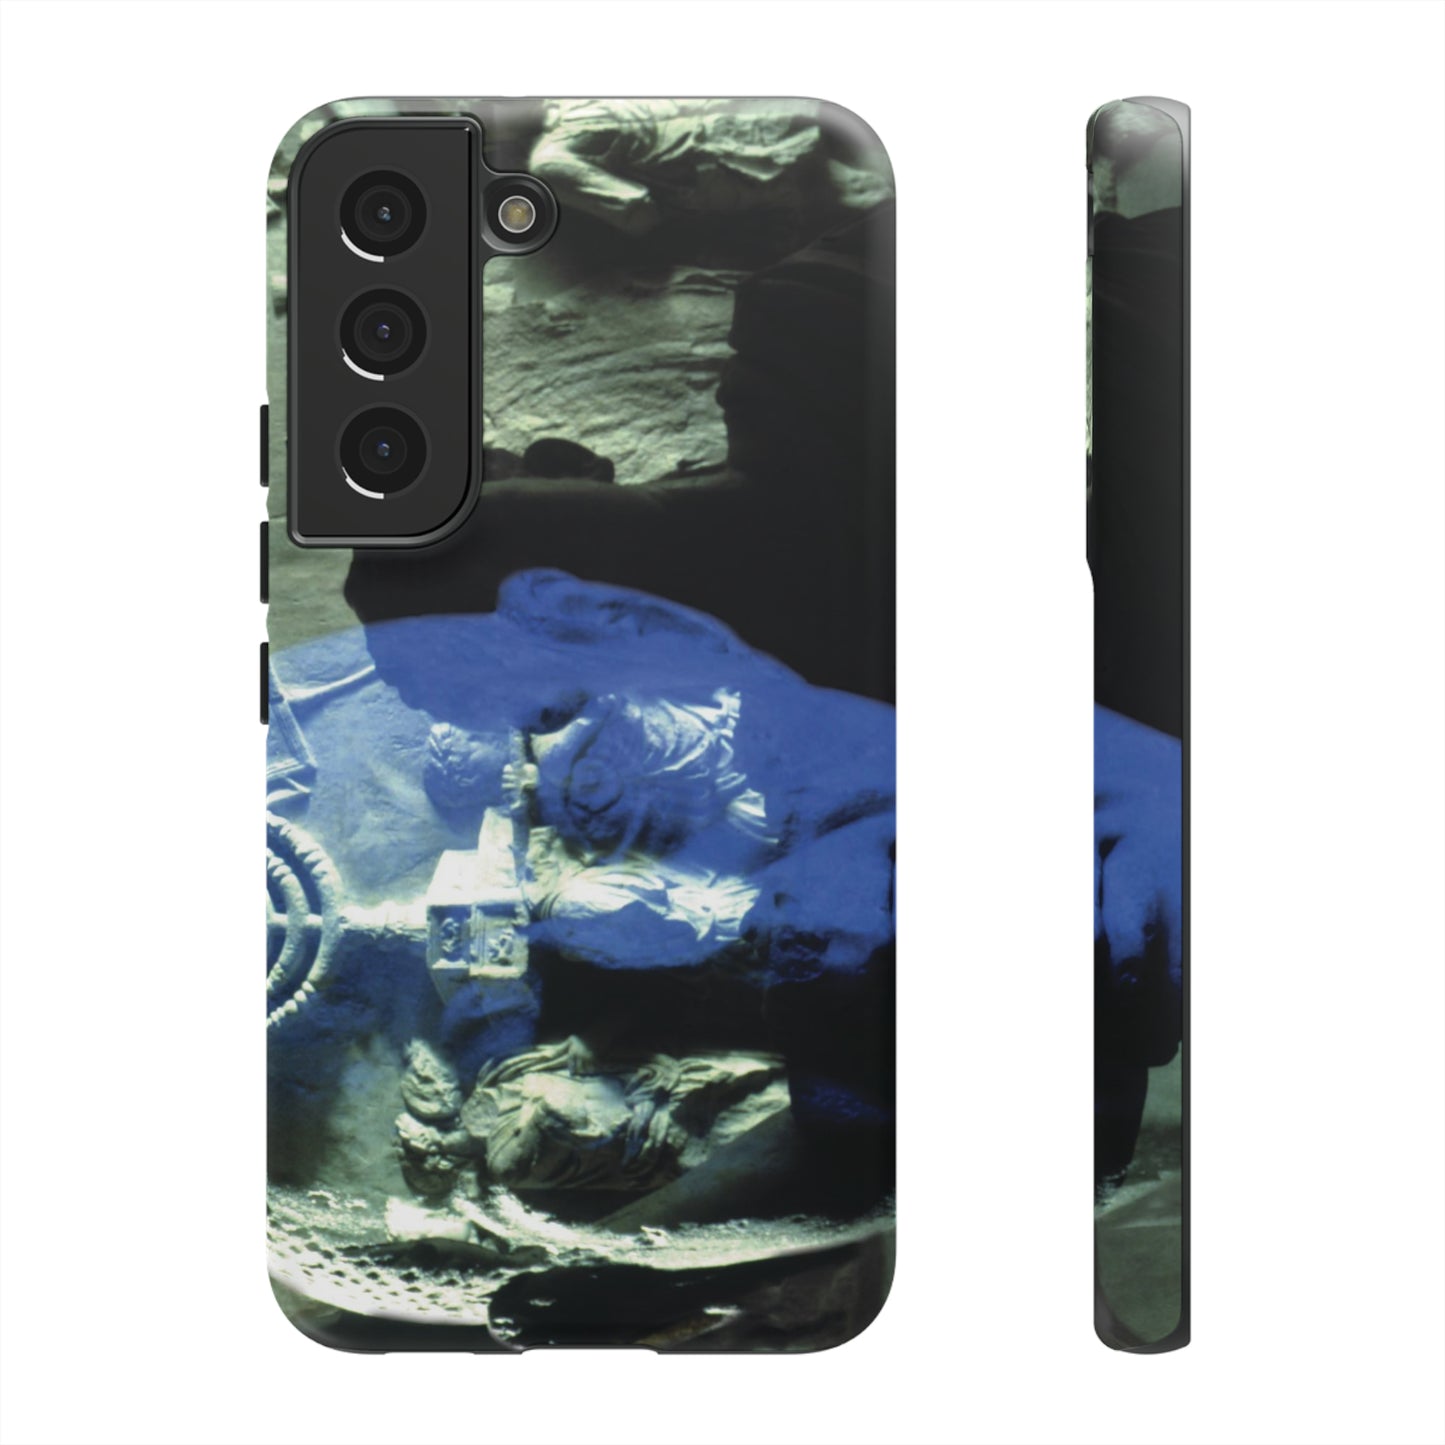 Titus and his father Vespasian Phone Cases